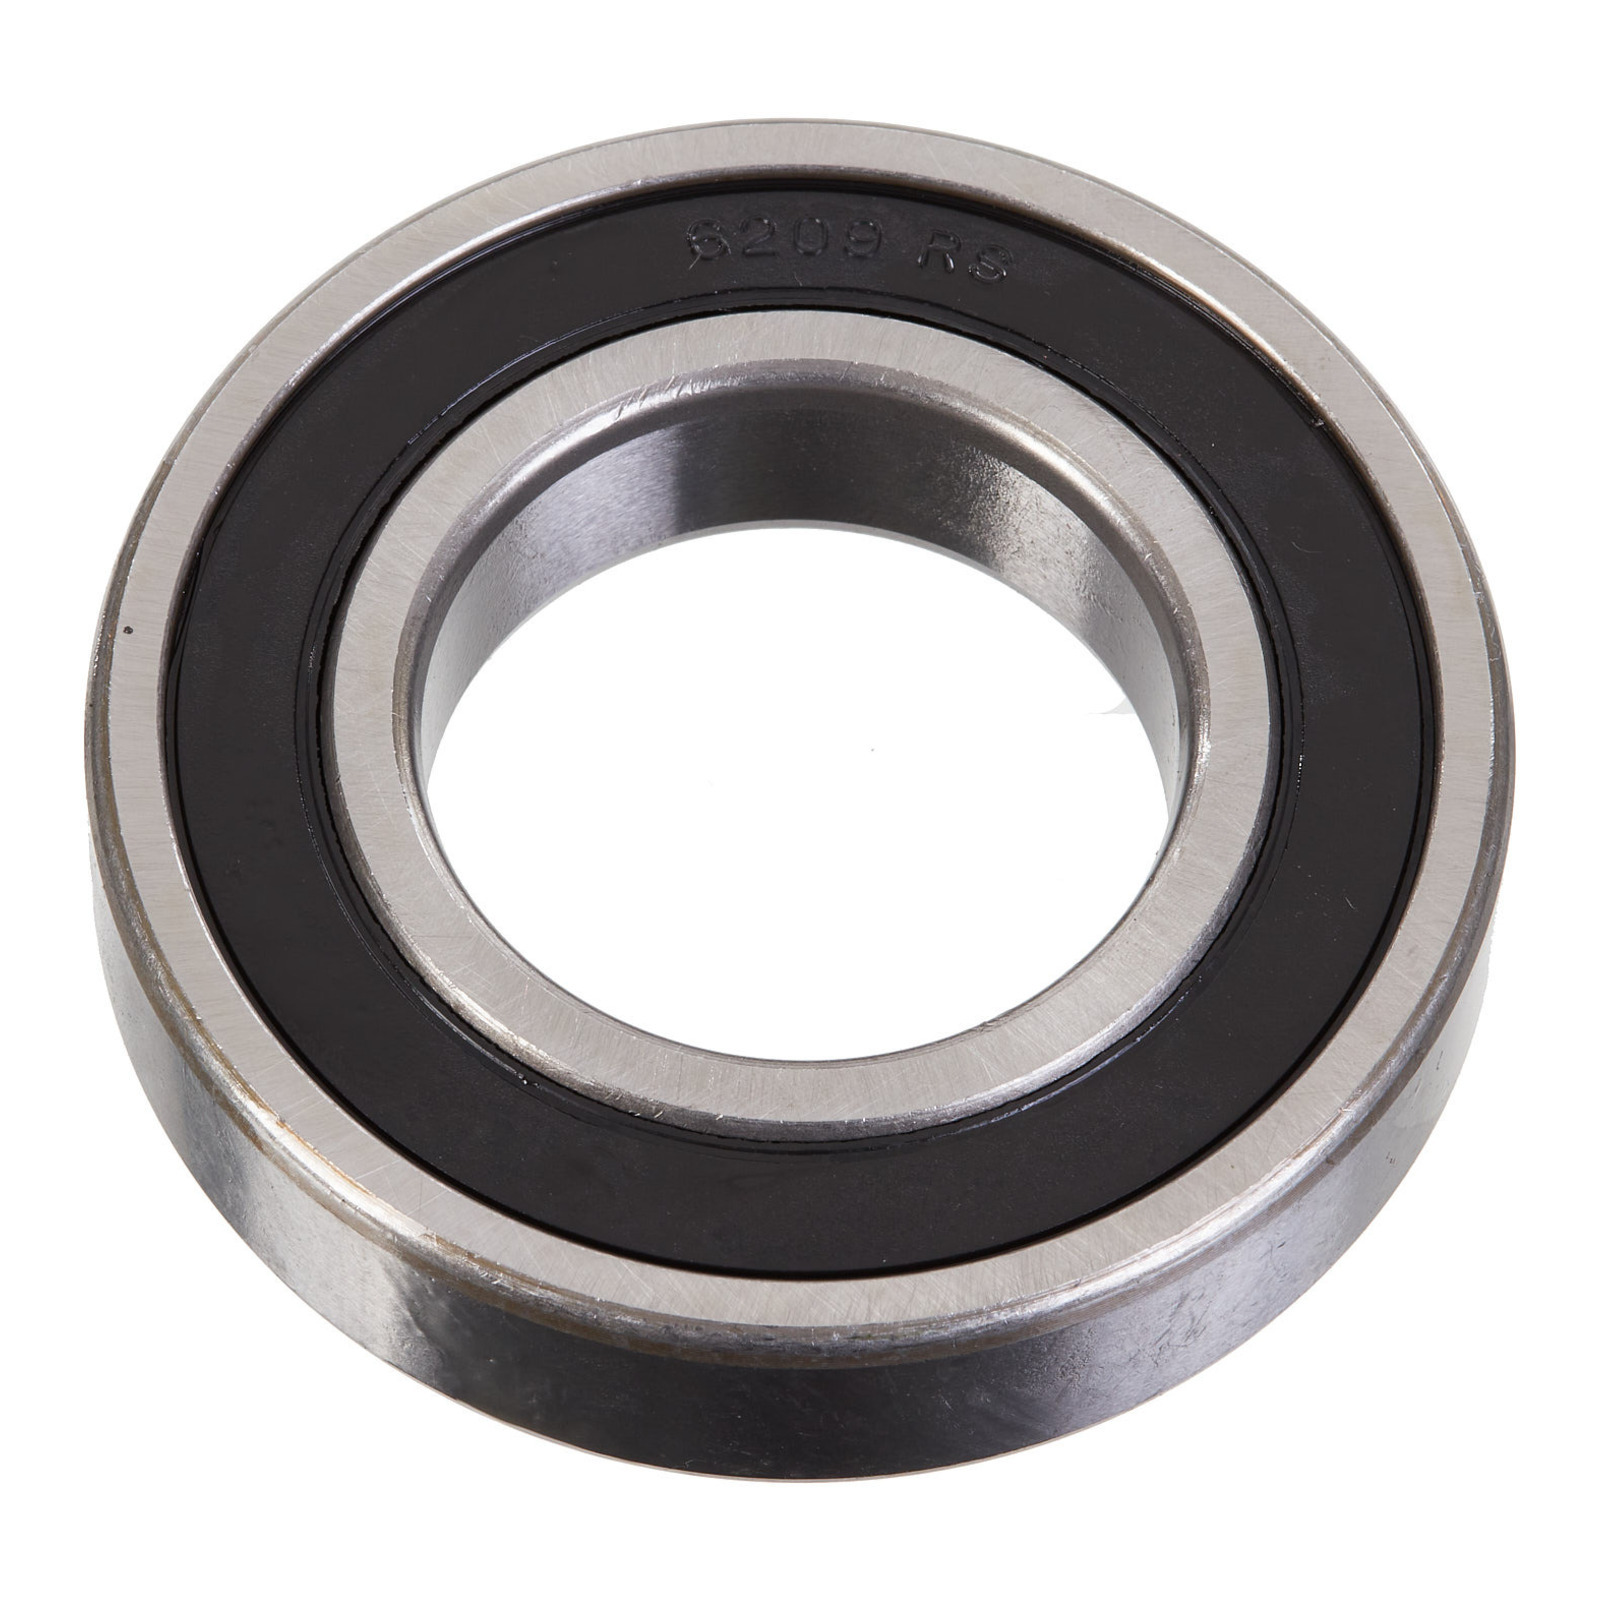 Bearing 6209 -2RS 1 piece/each